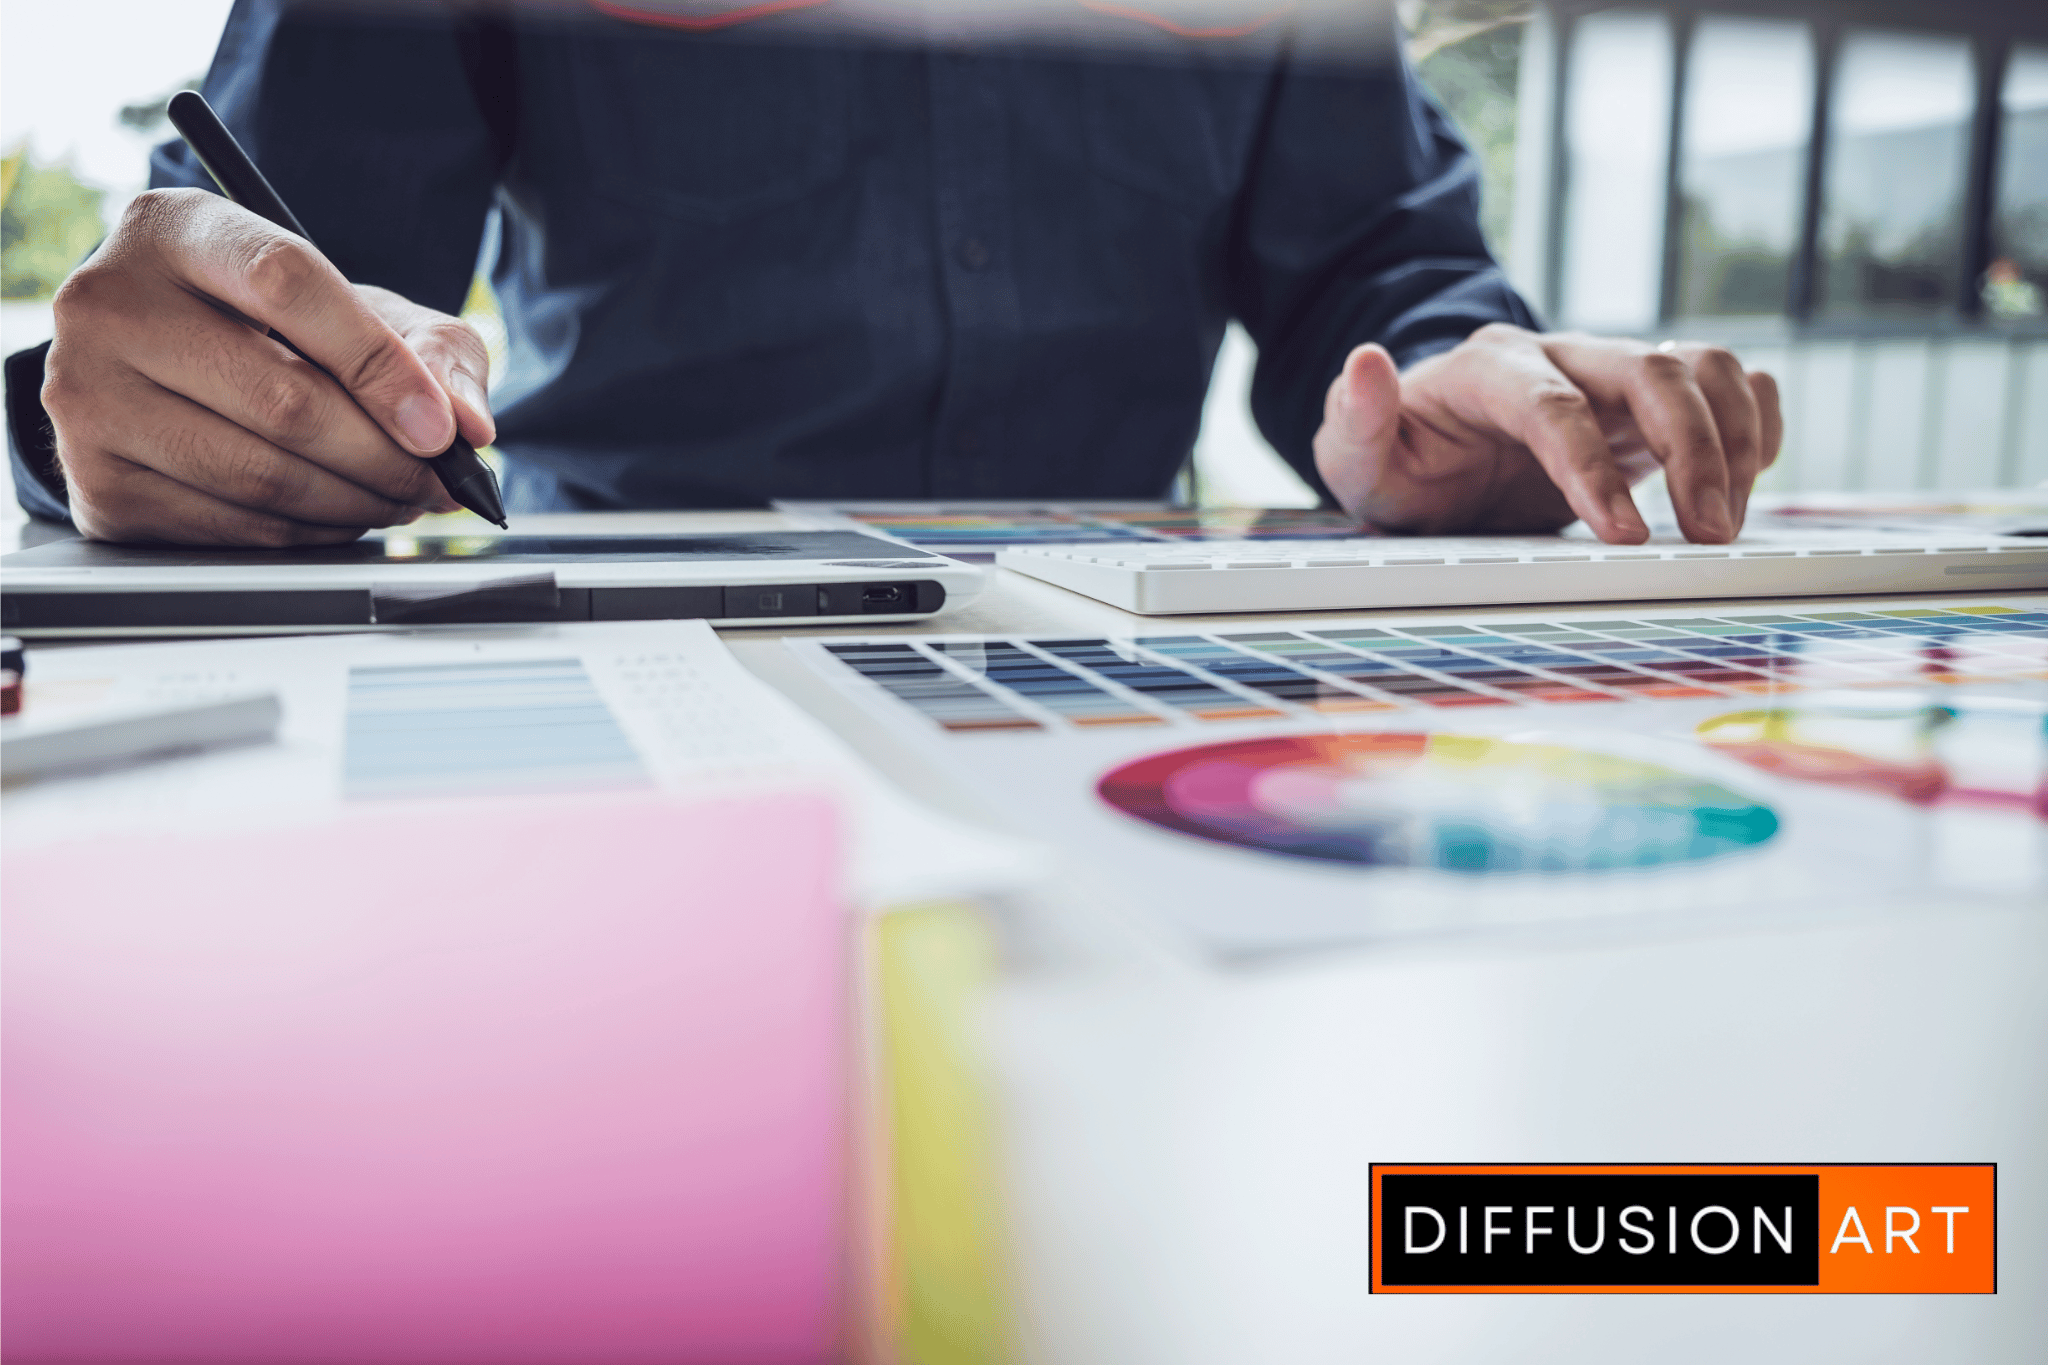 What is Diffusion Art, and How Can I Use It?